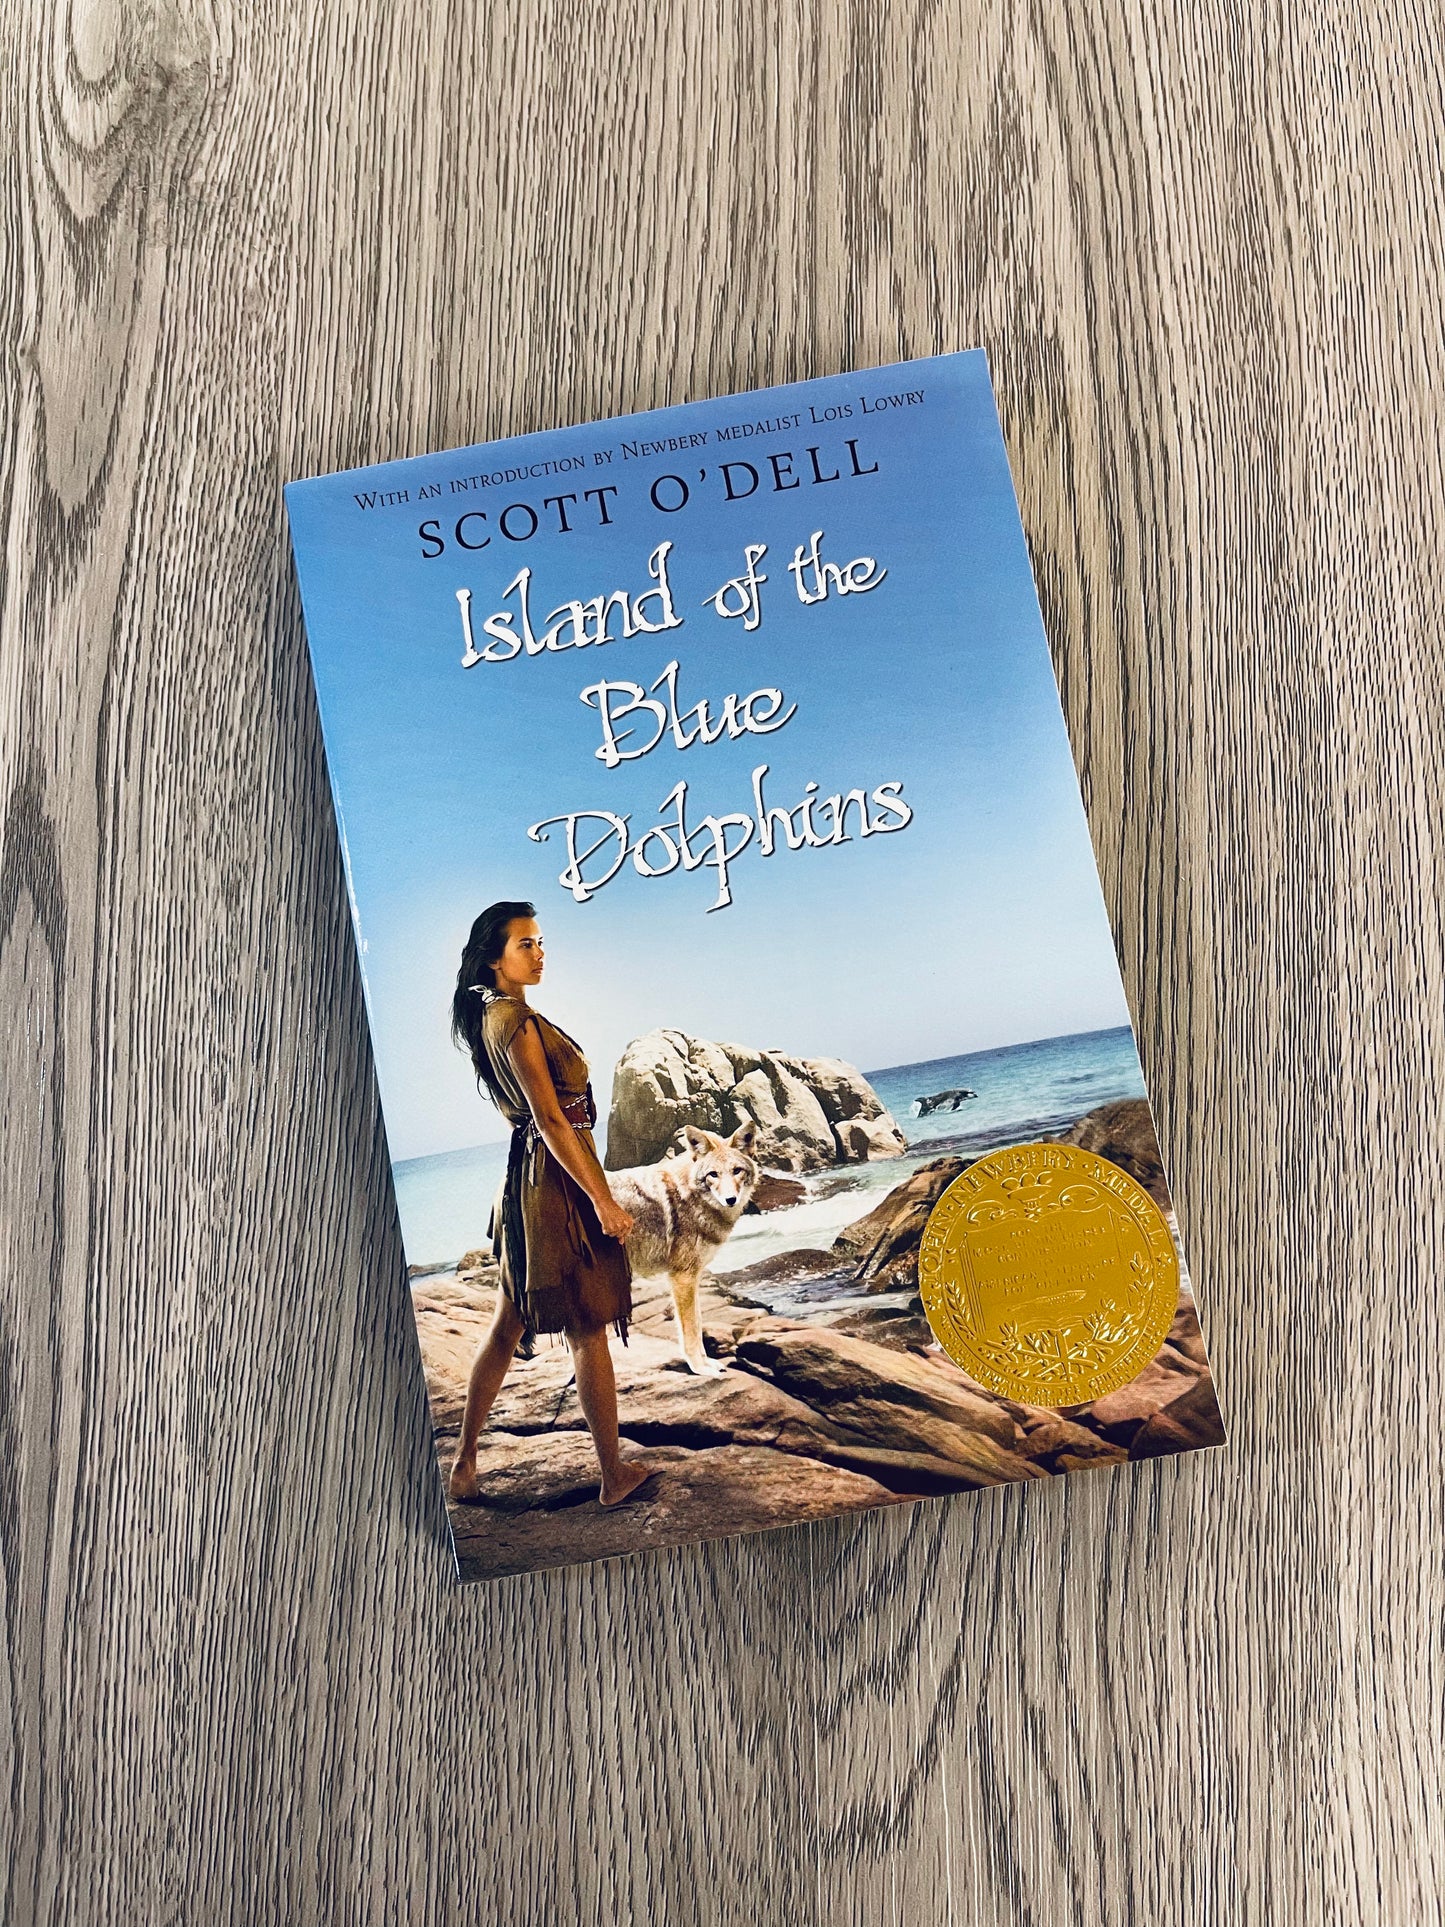 Island of The Blue Dolphins (Island of the Blue Dolphins #1) by Scott O'Dell